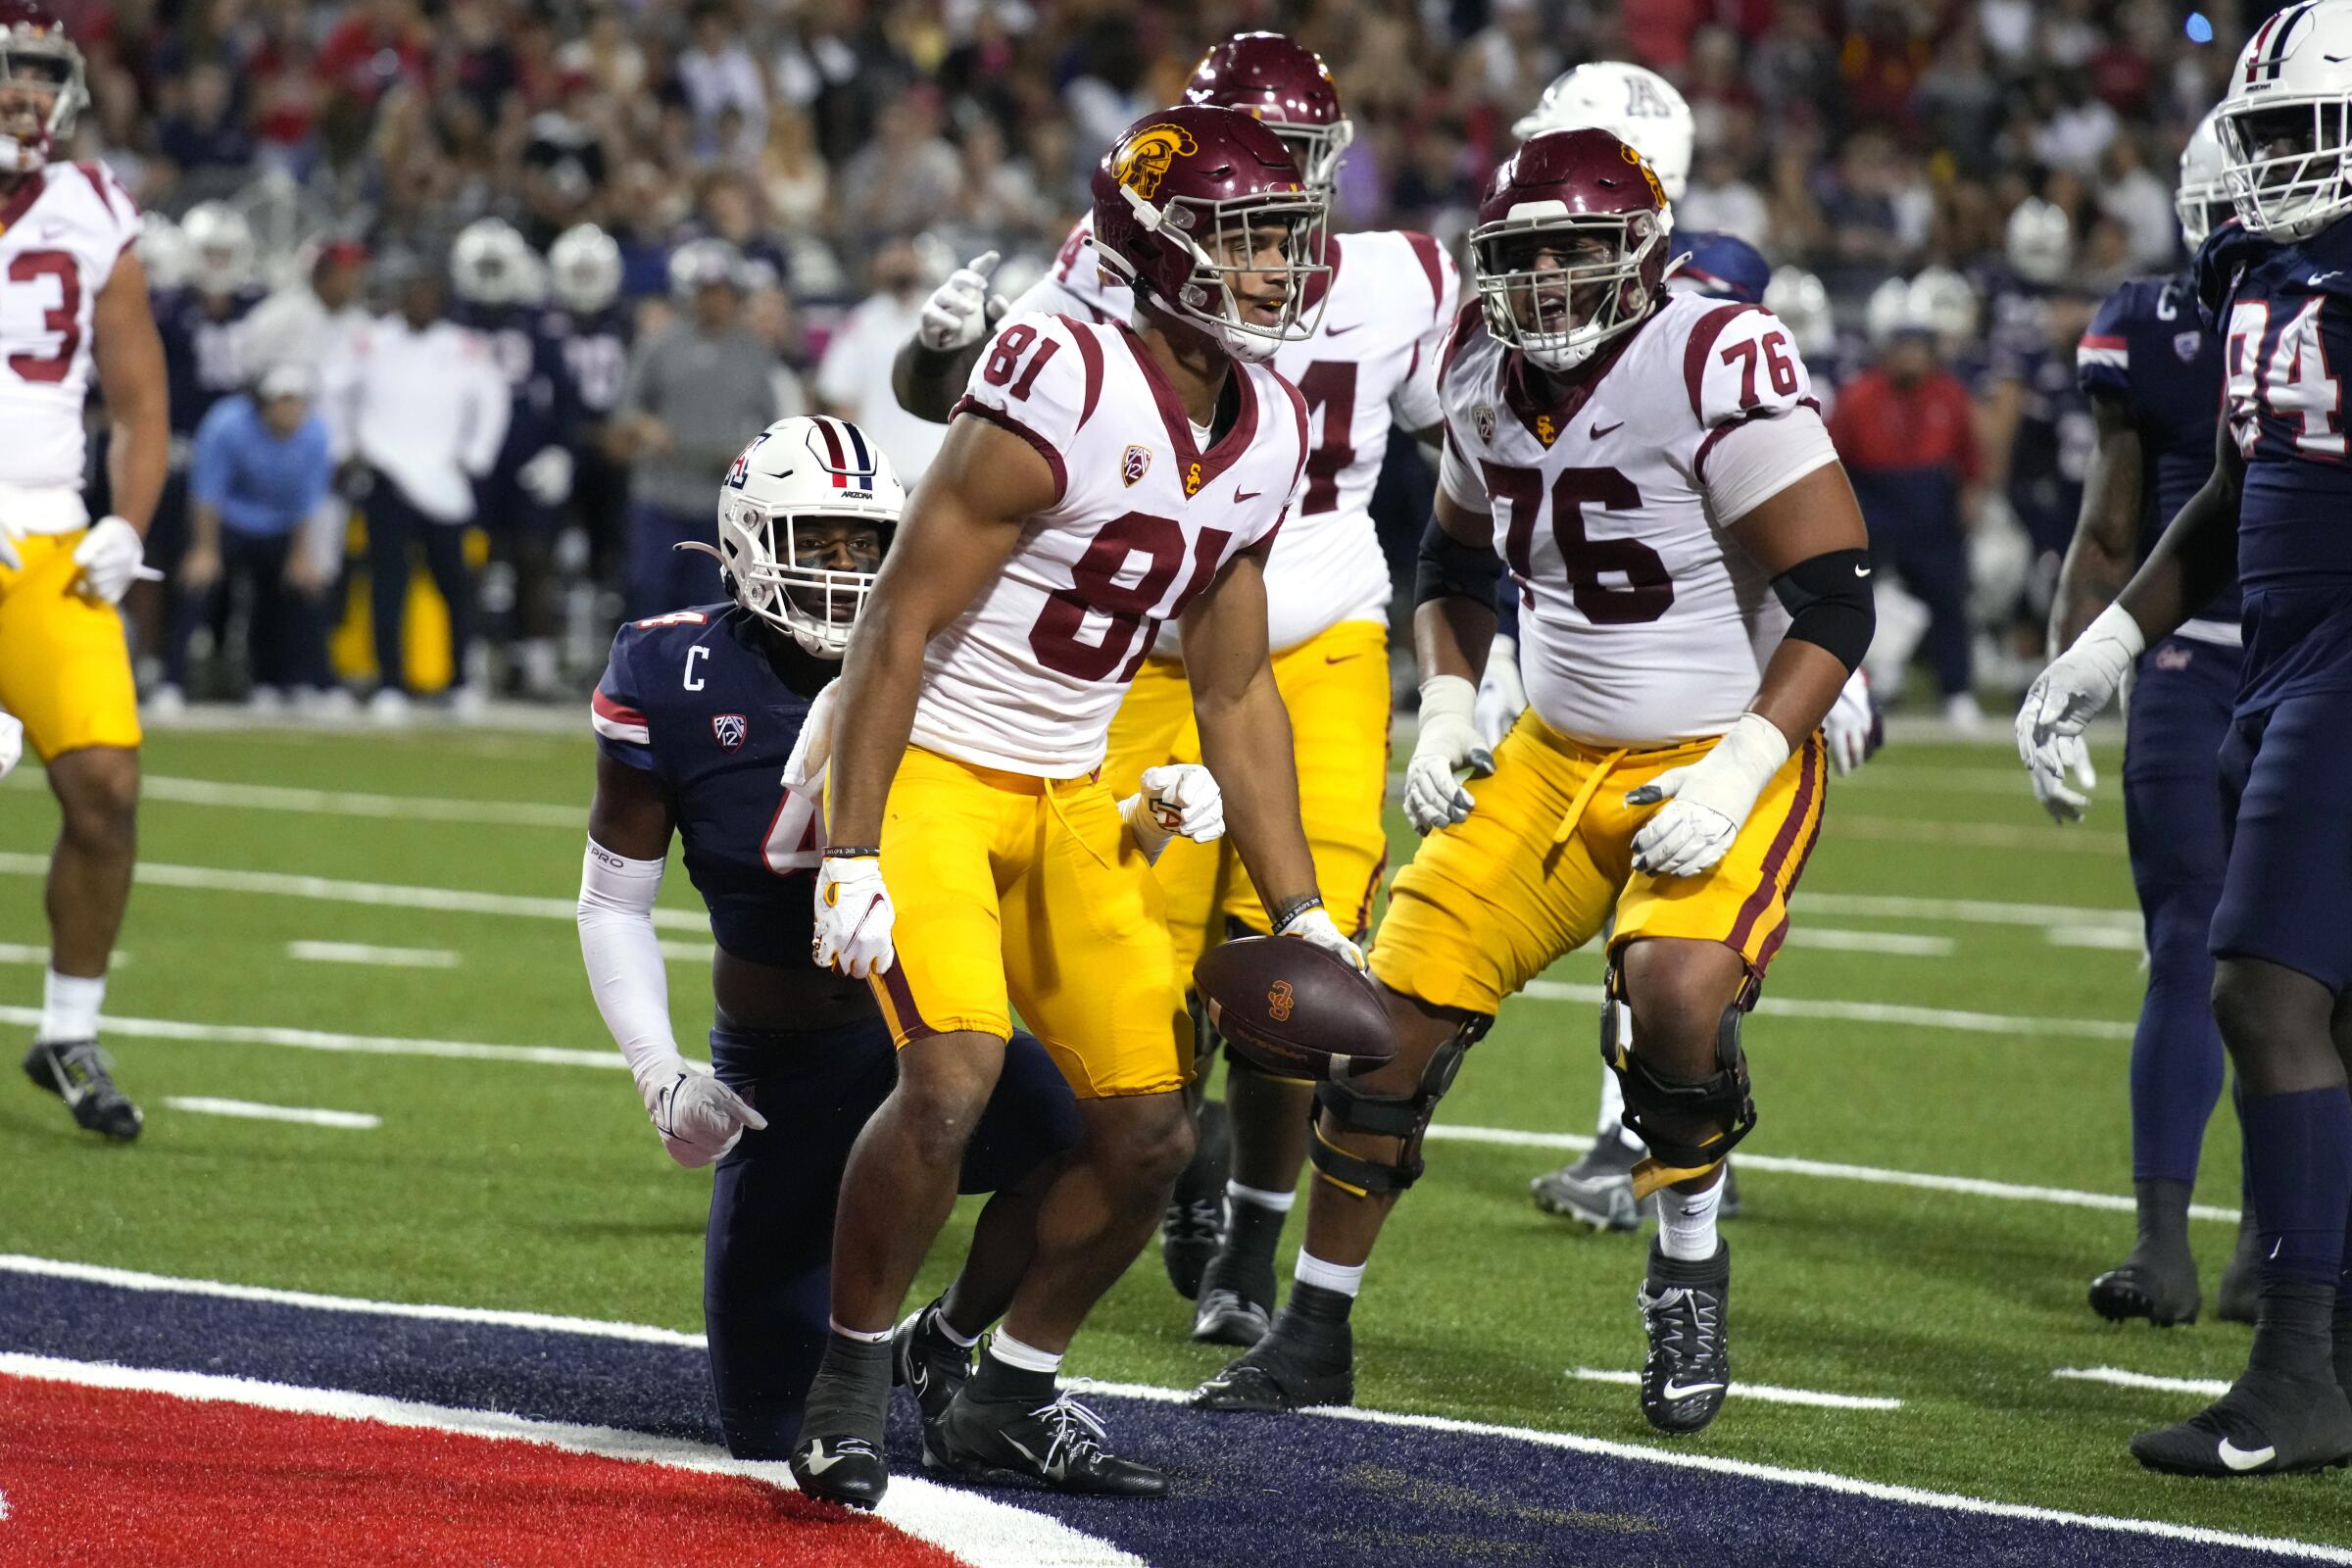 USC receiver Kyle Ford reacts after scoring a touchdown against Arizona 